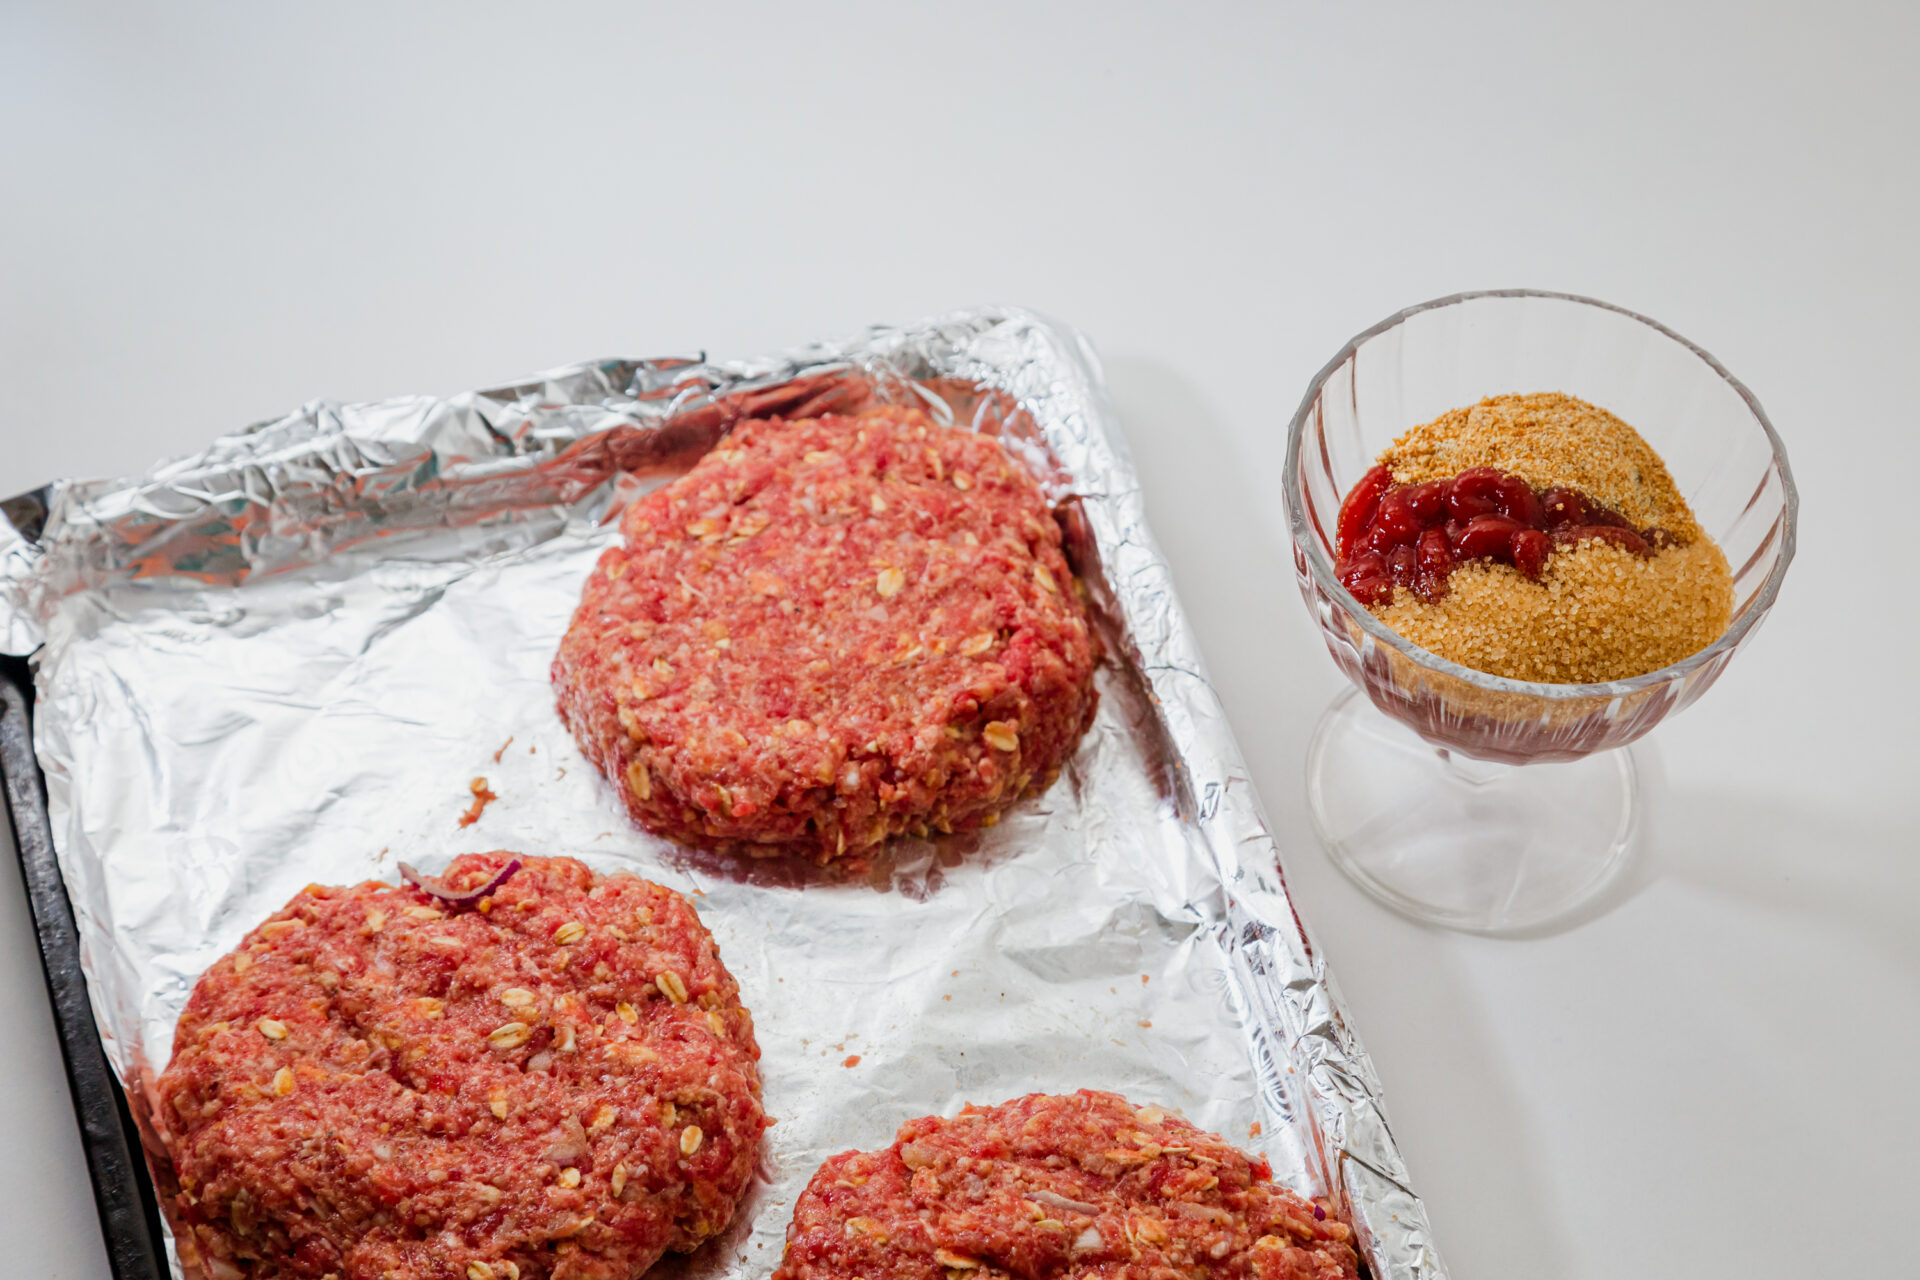 Amish Baked and Barbecued Burgers